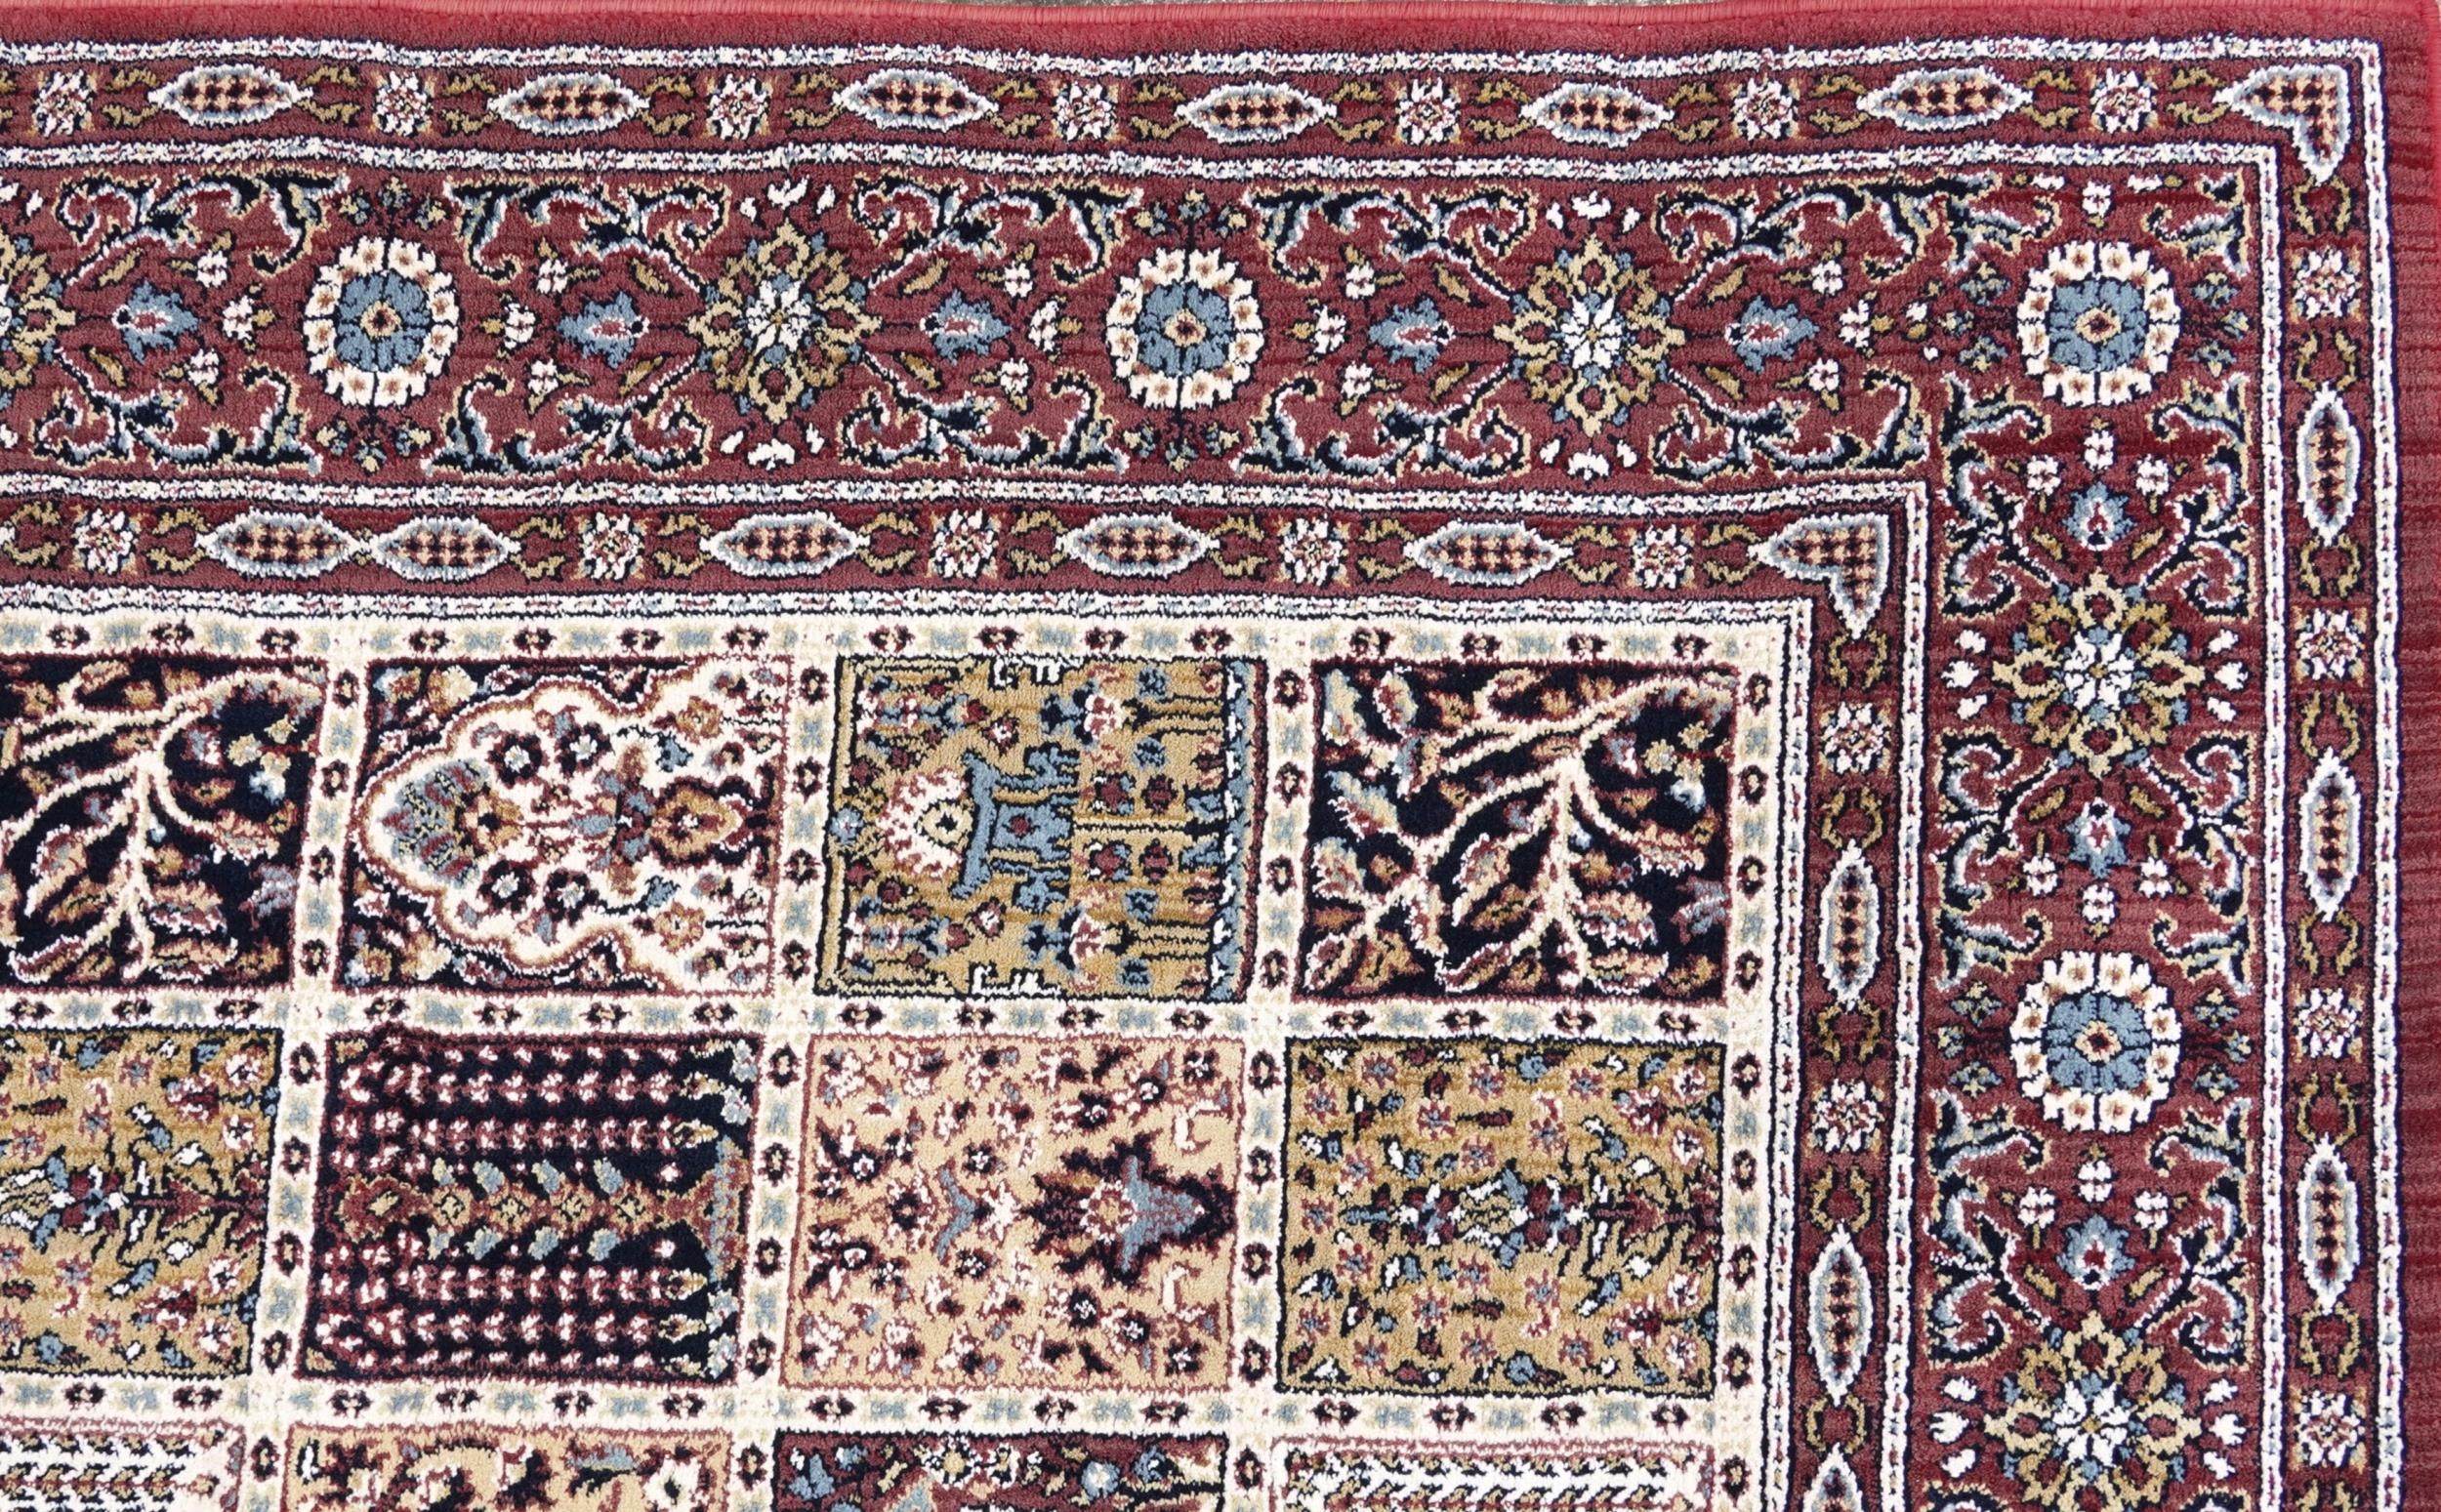 Pair of rectangular Persian style Valby Ruta rugs, each 195cm x 133cm - Image 4 of 13